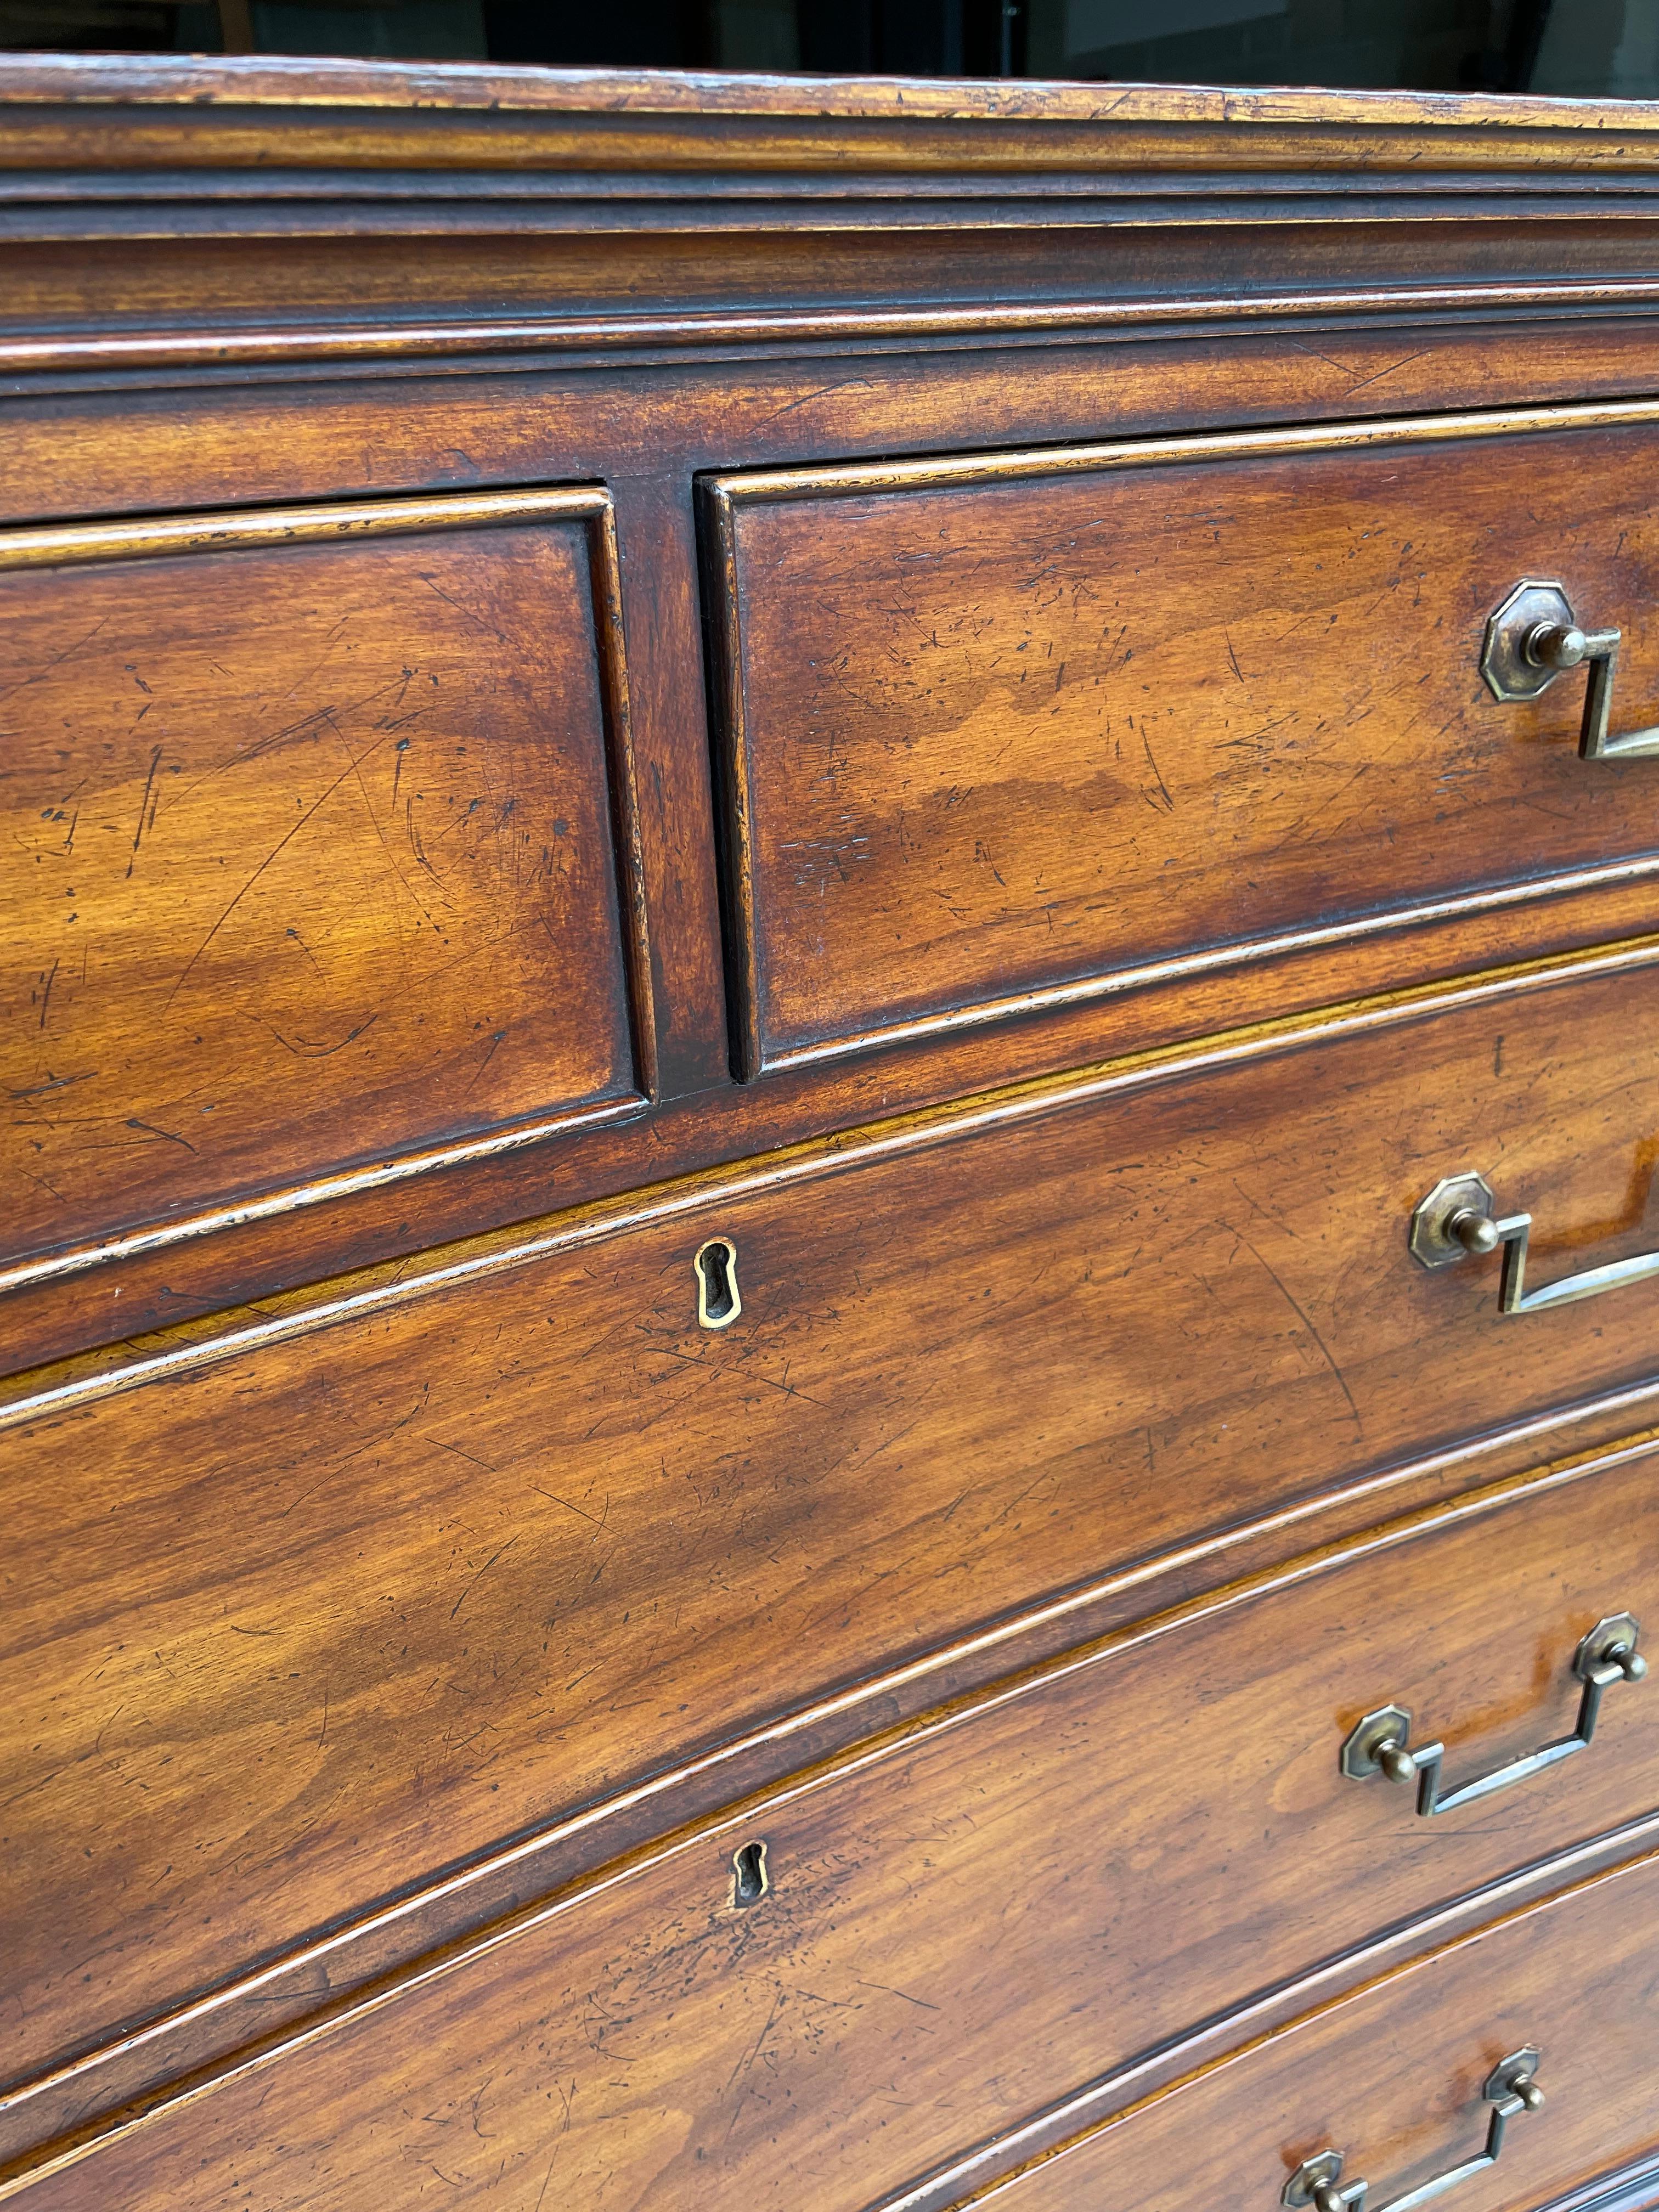 Holland MacRae Chatsworth mahogany chest of drawers for Lee Jofa is a stunning piece of artistry. The Chatsworth chest takes a traditional style and updates it with a beautiful concave design. The wood is distressed and antiqued. This piece is thin